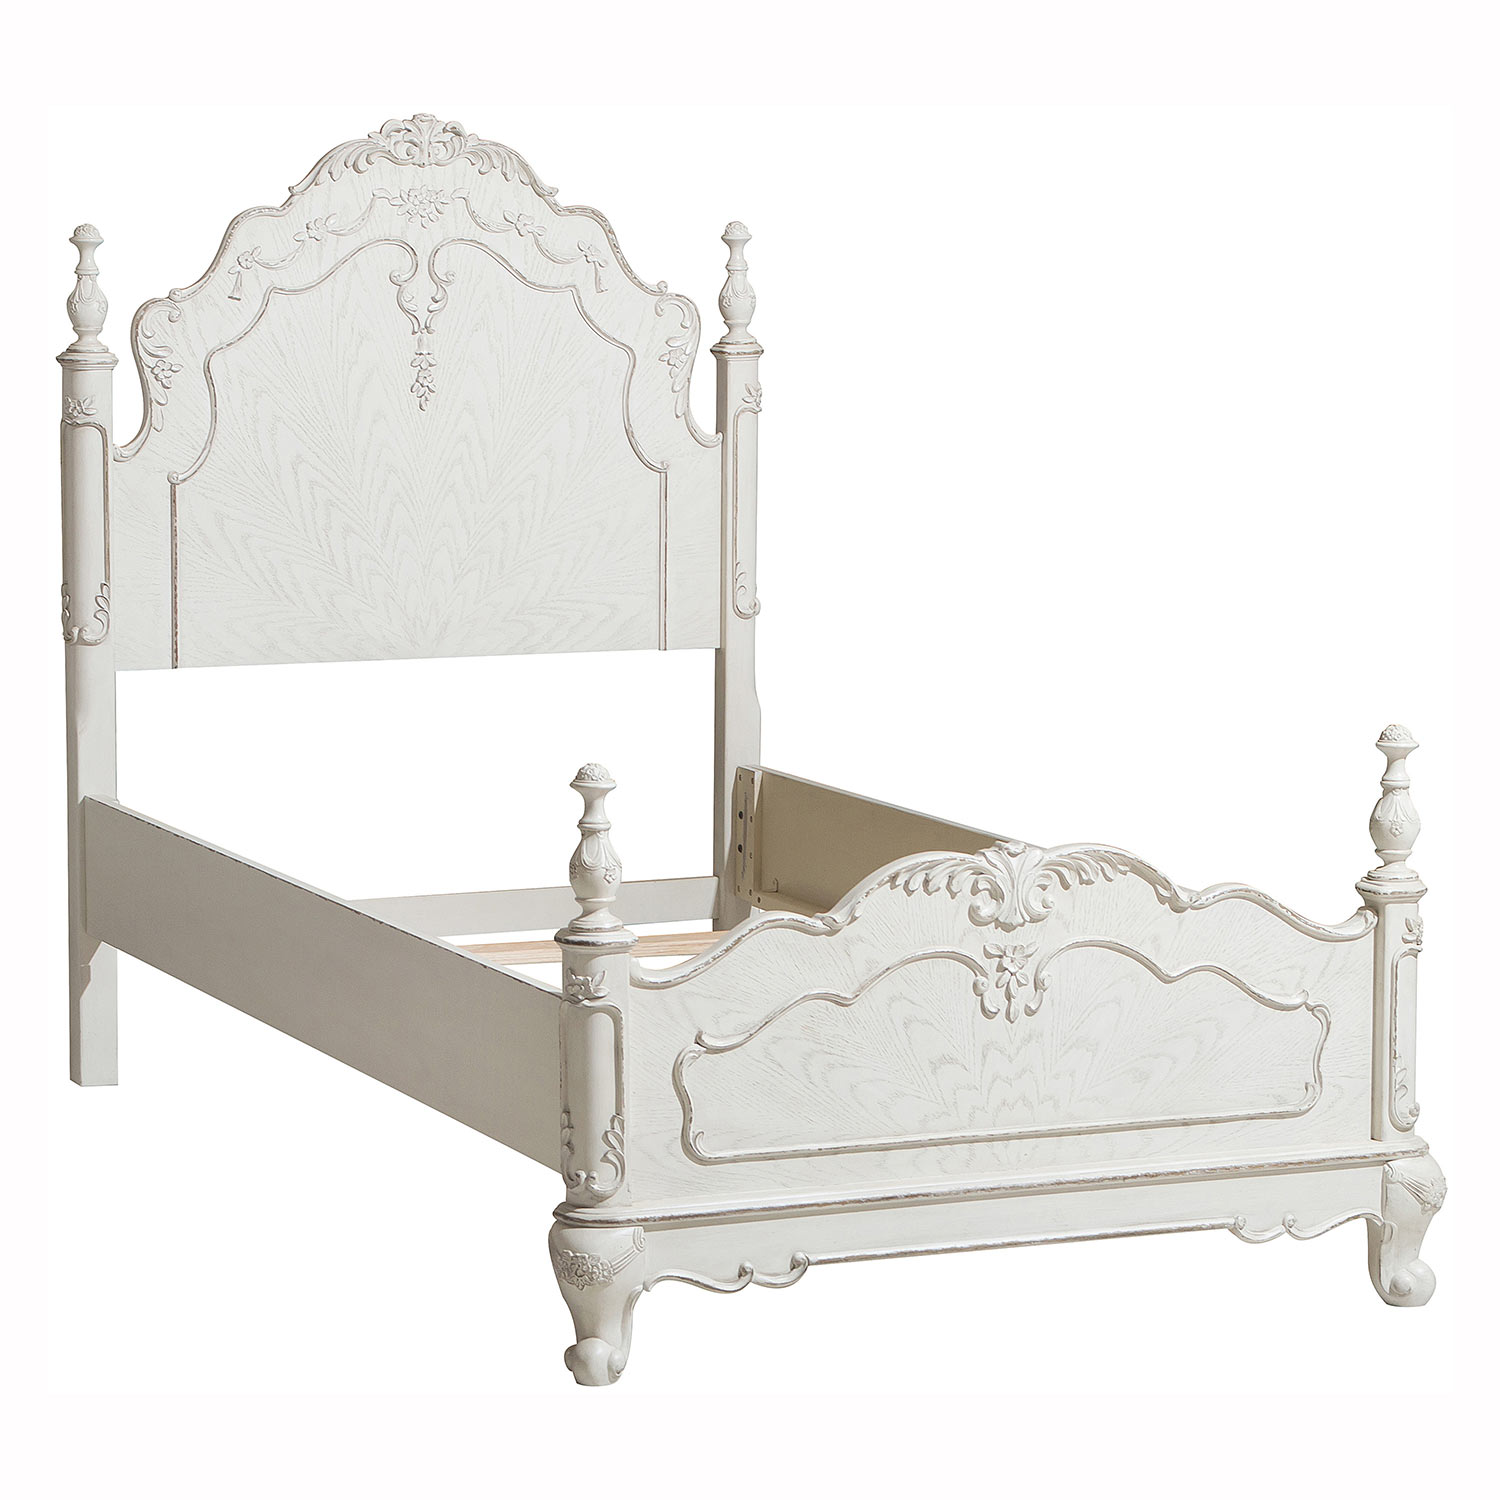 Homelegance Cinderella Bed - Antique White with Gray Rub-Through